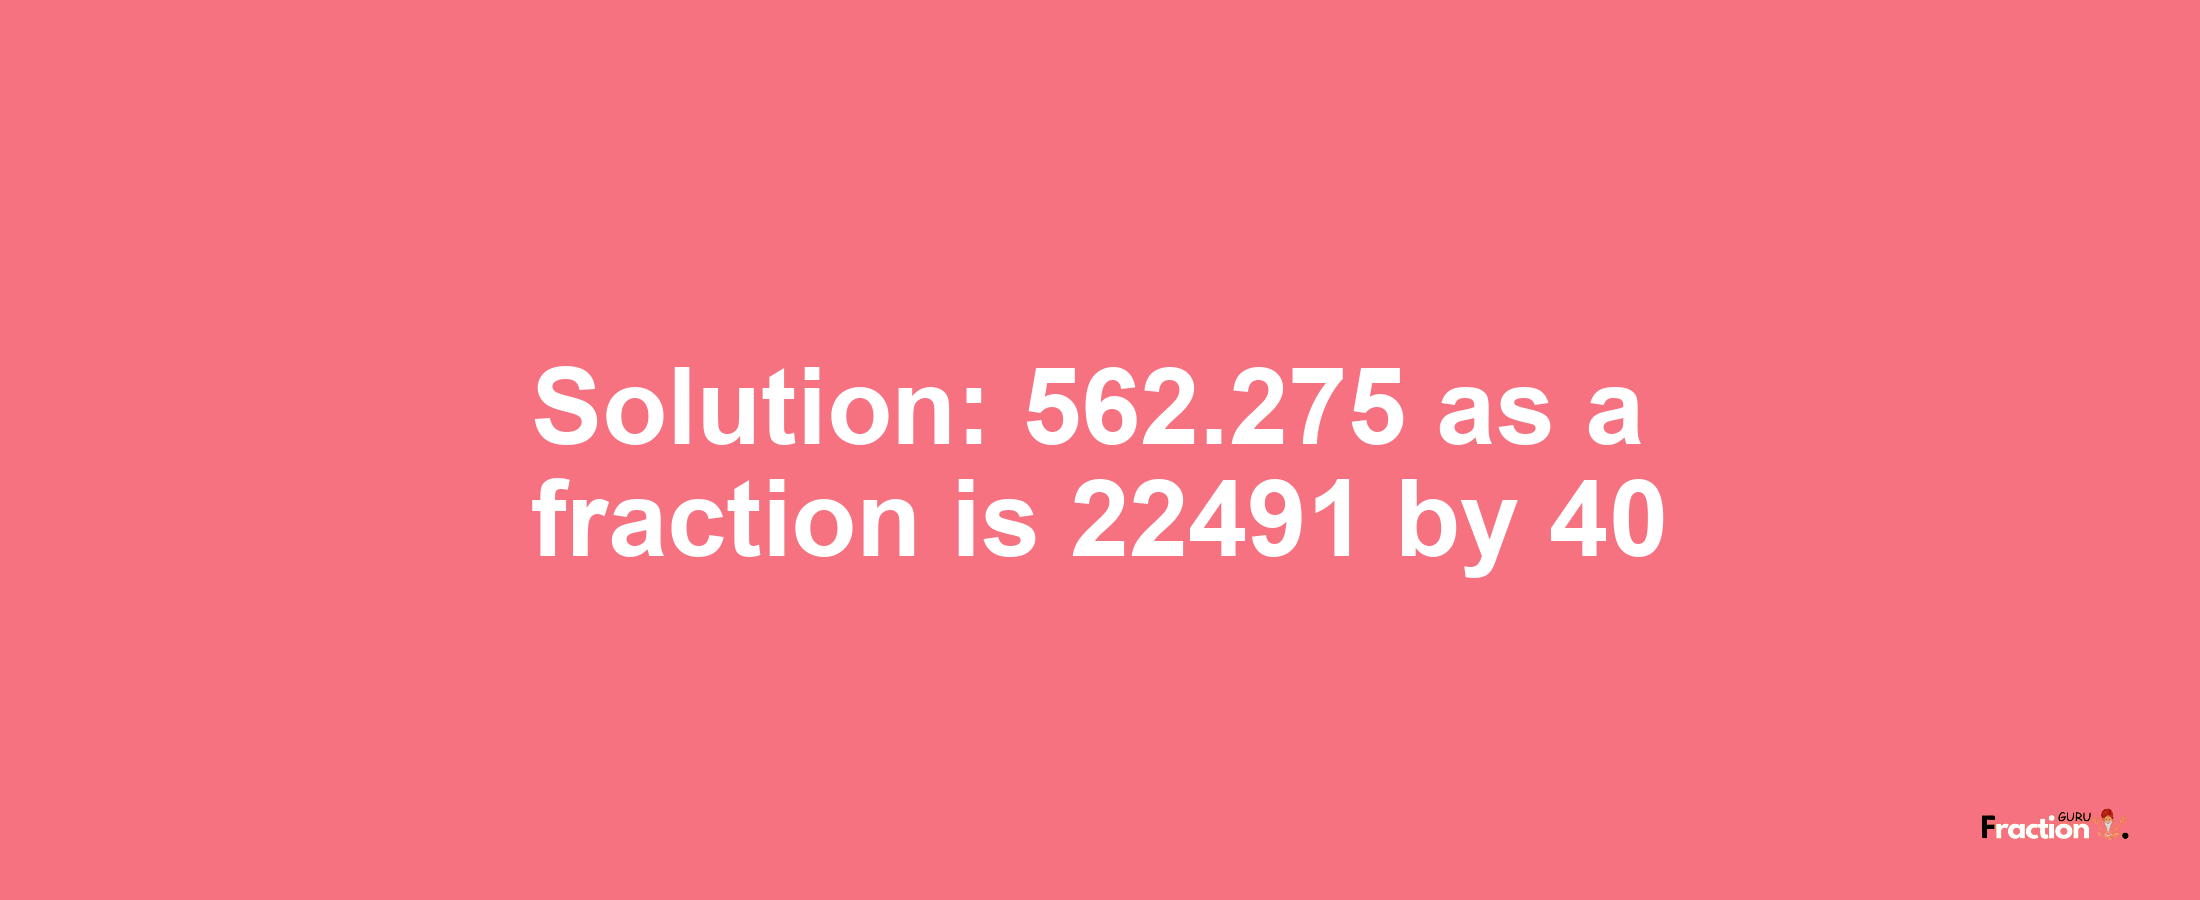 Solution:562.275 as a fraction is 22491/40